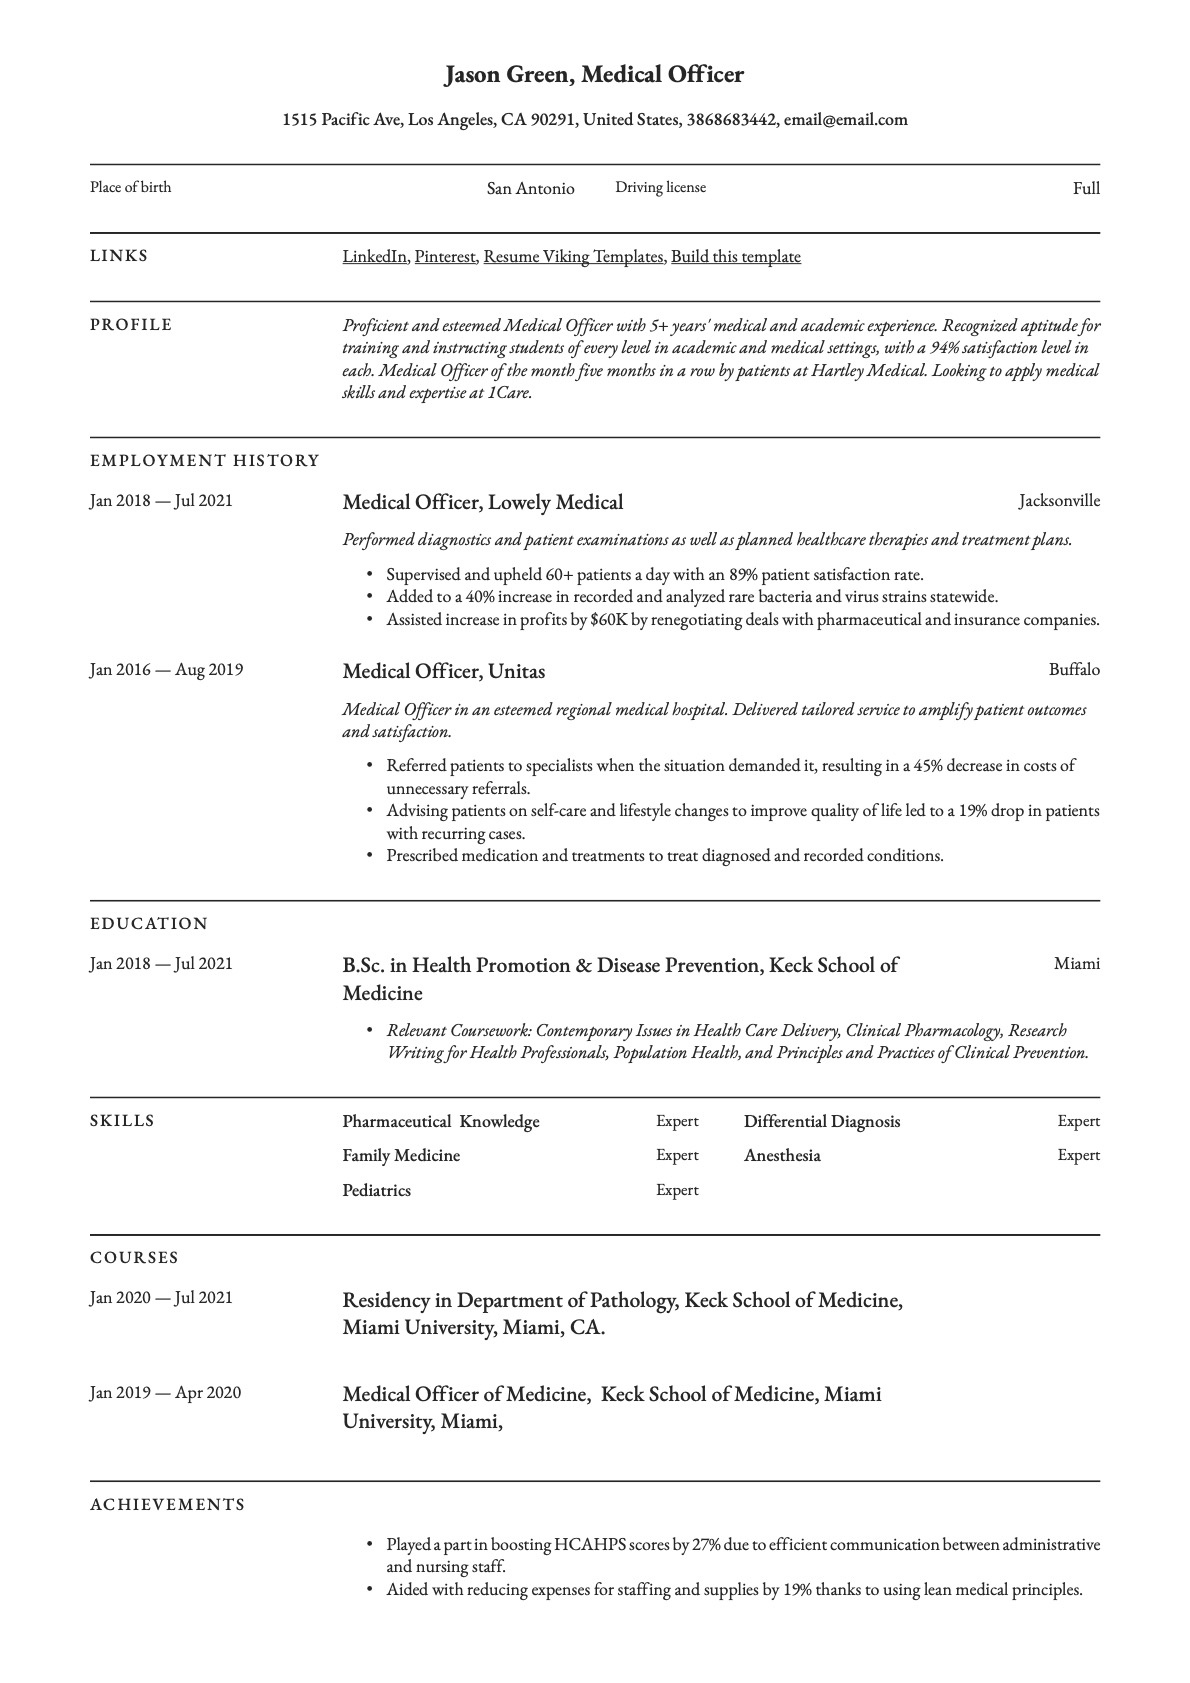 Professional Medical Officer Resume Template